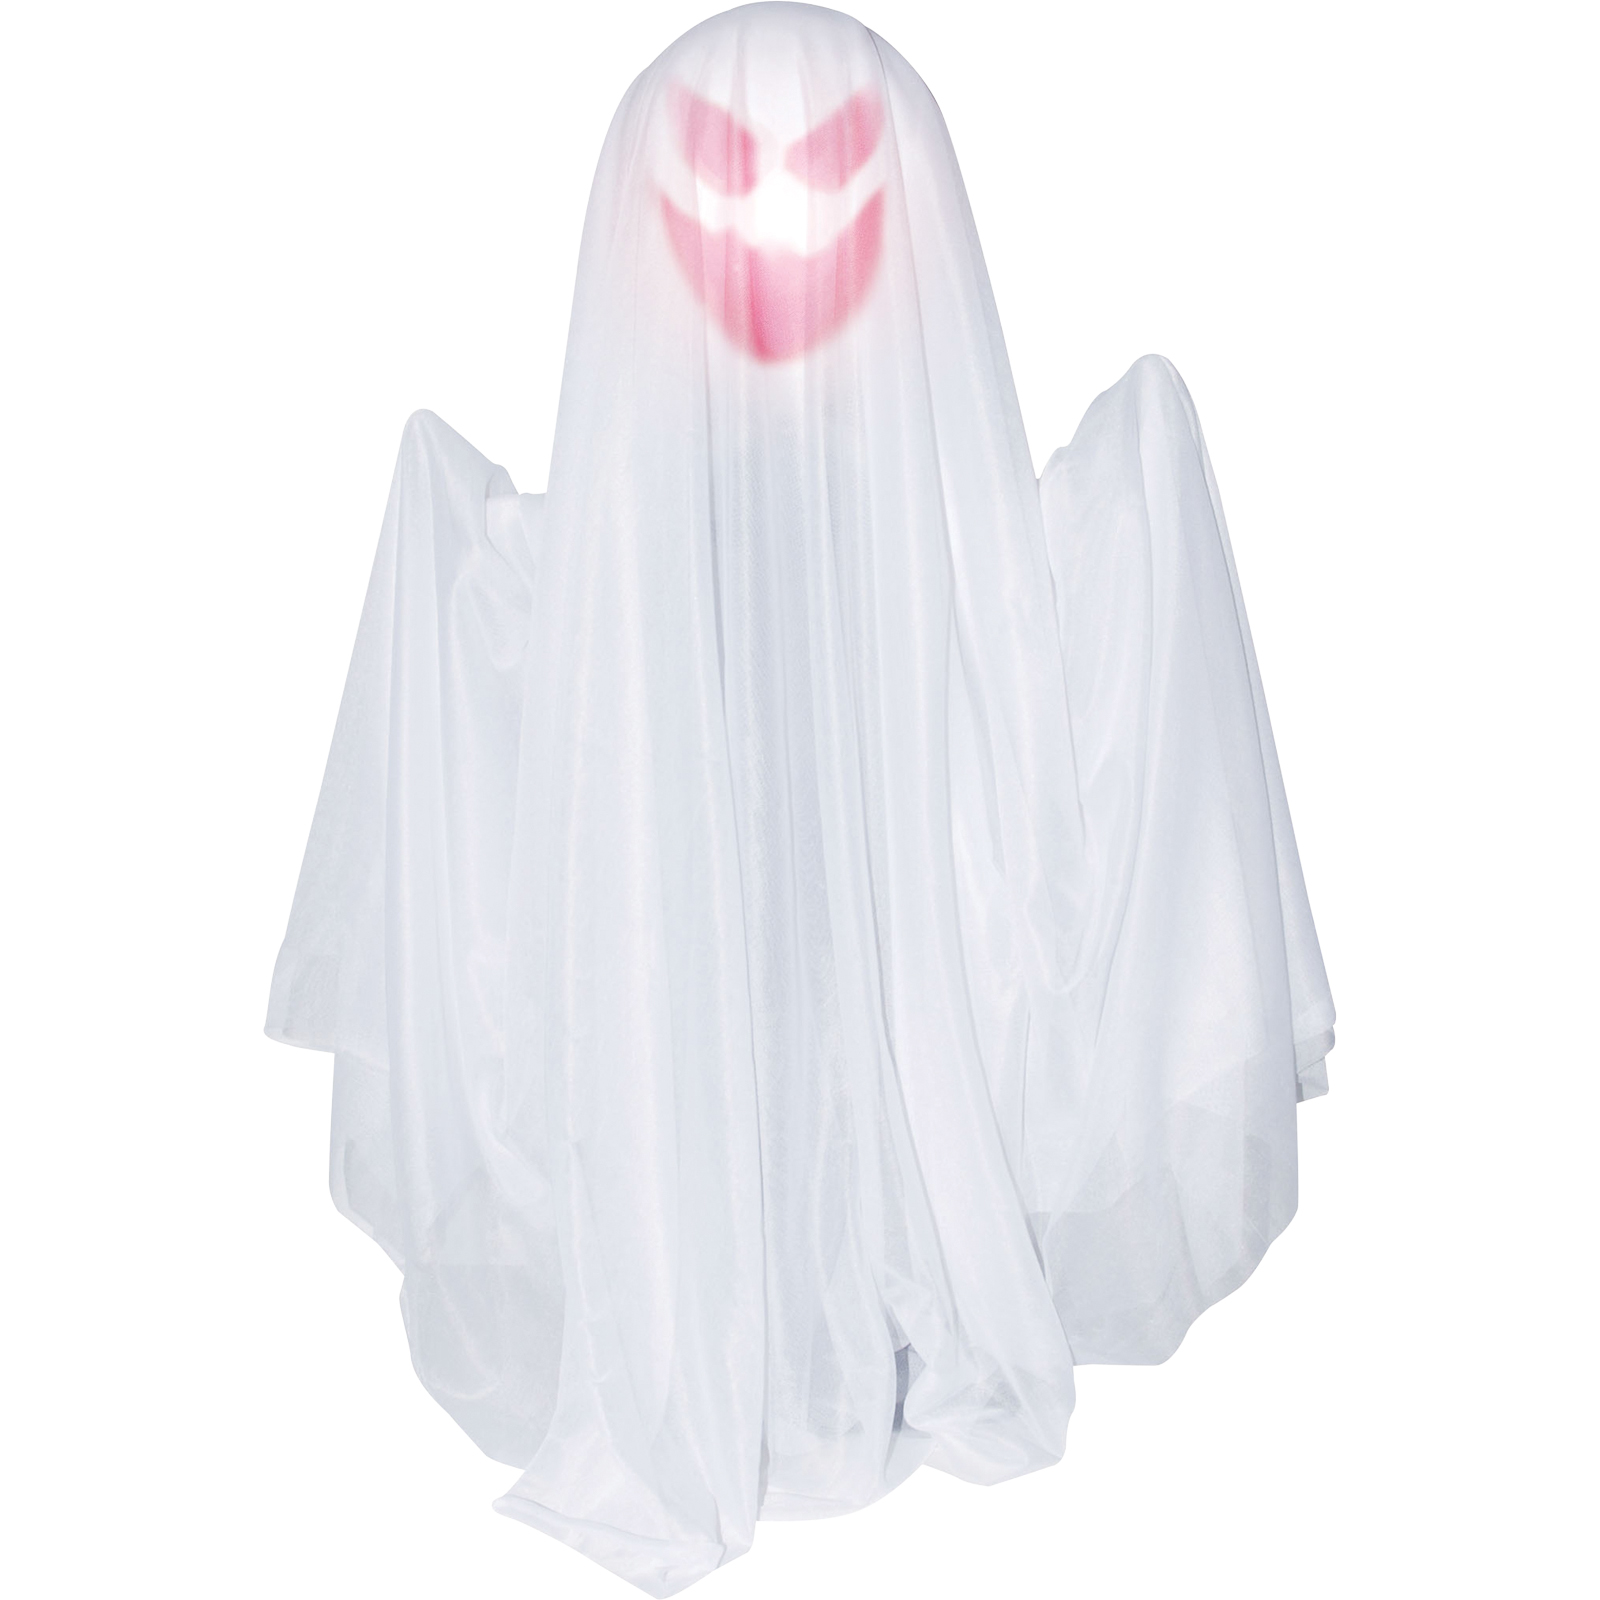 27' Sound Activated Rising Ghost Animated Halloween Prop